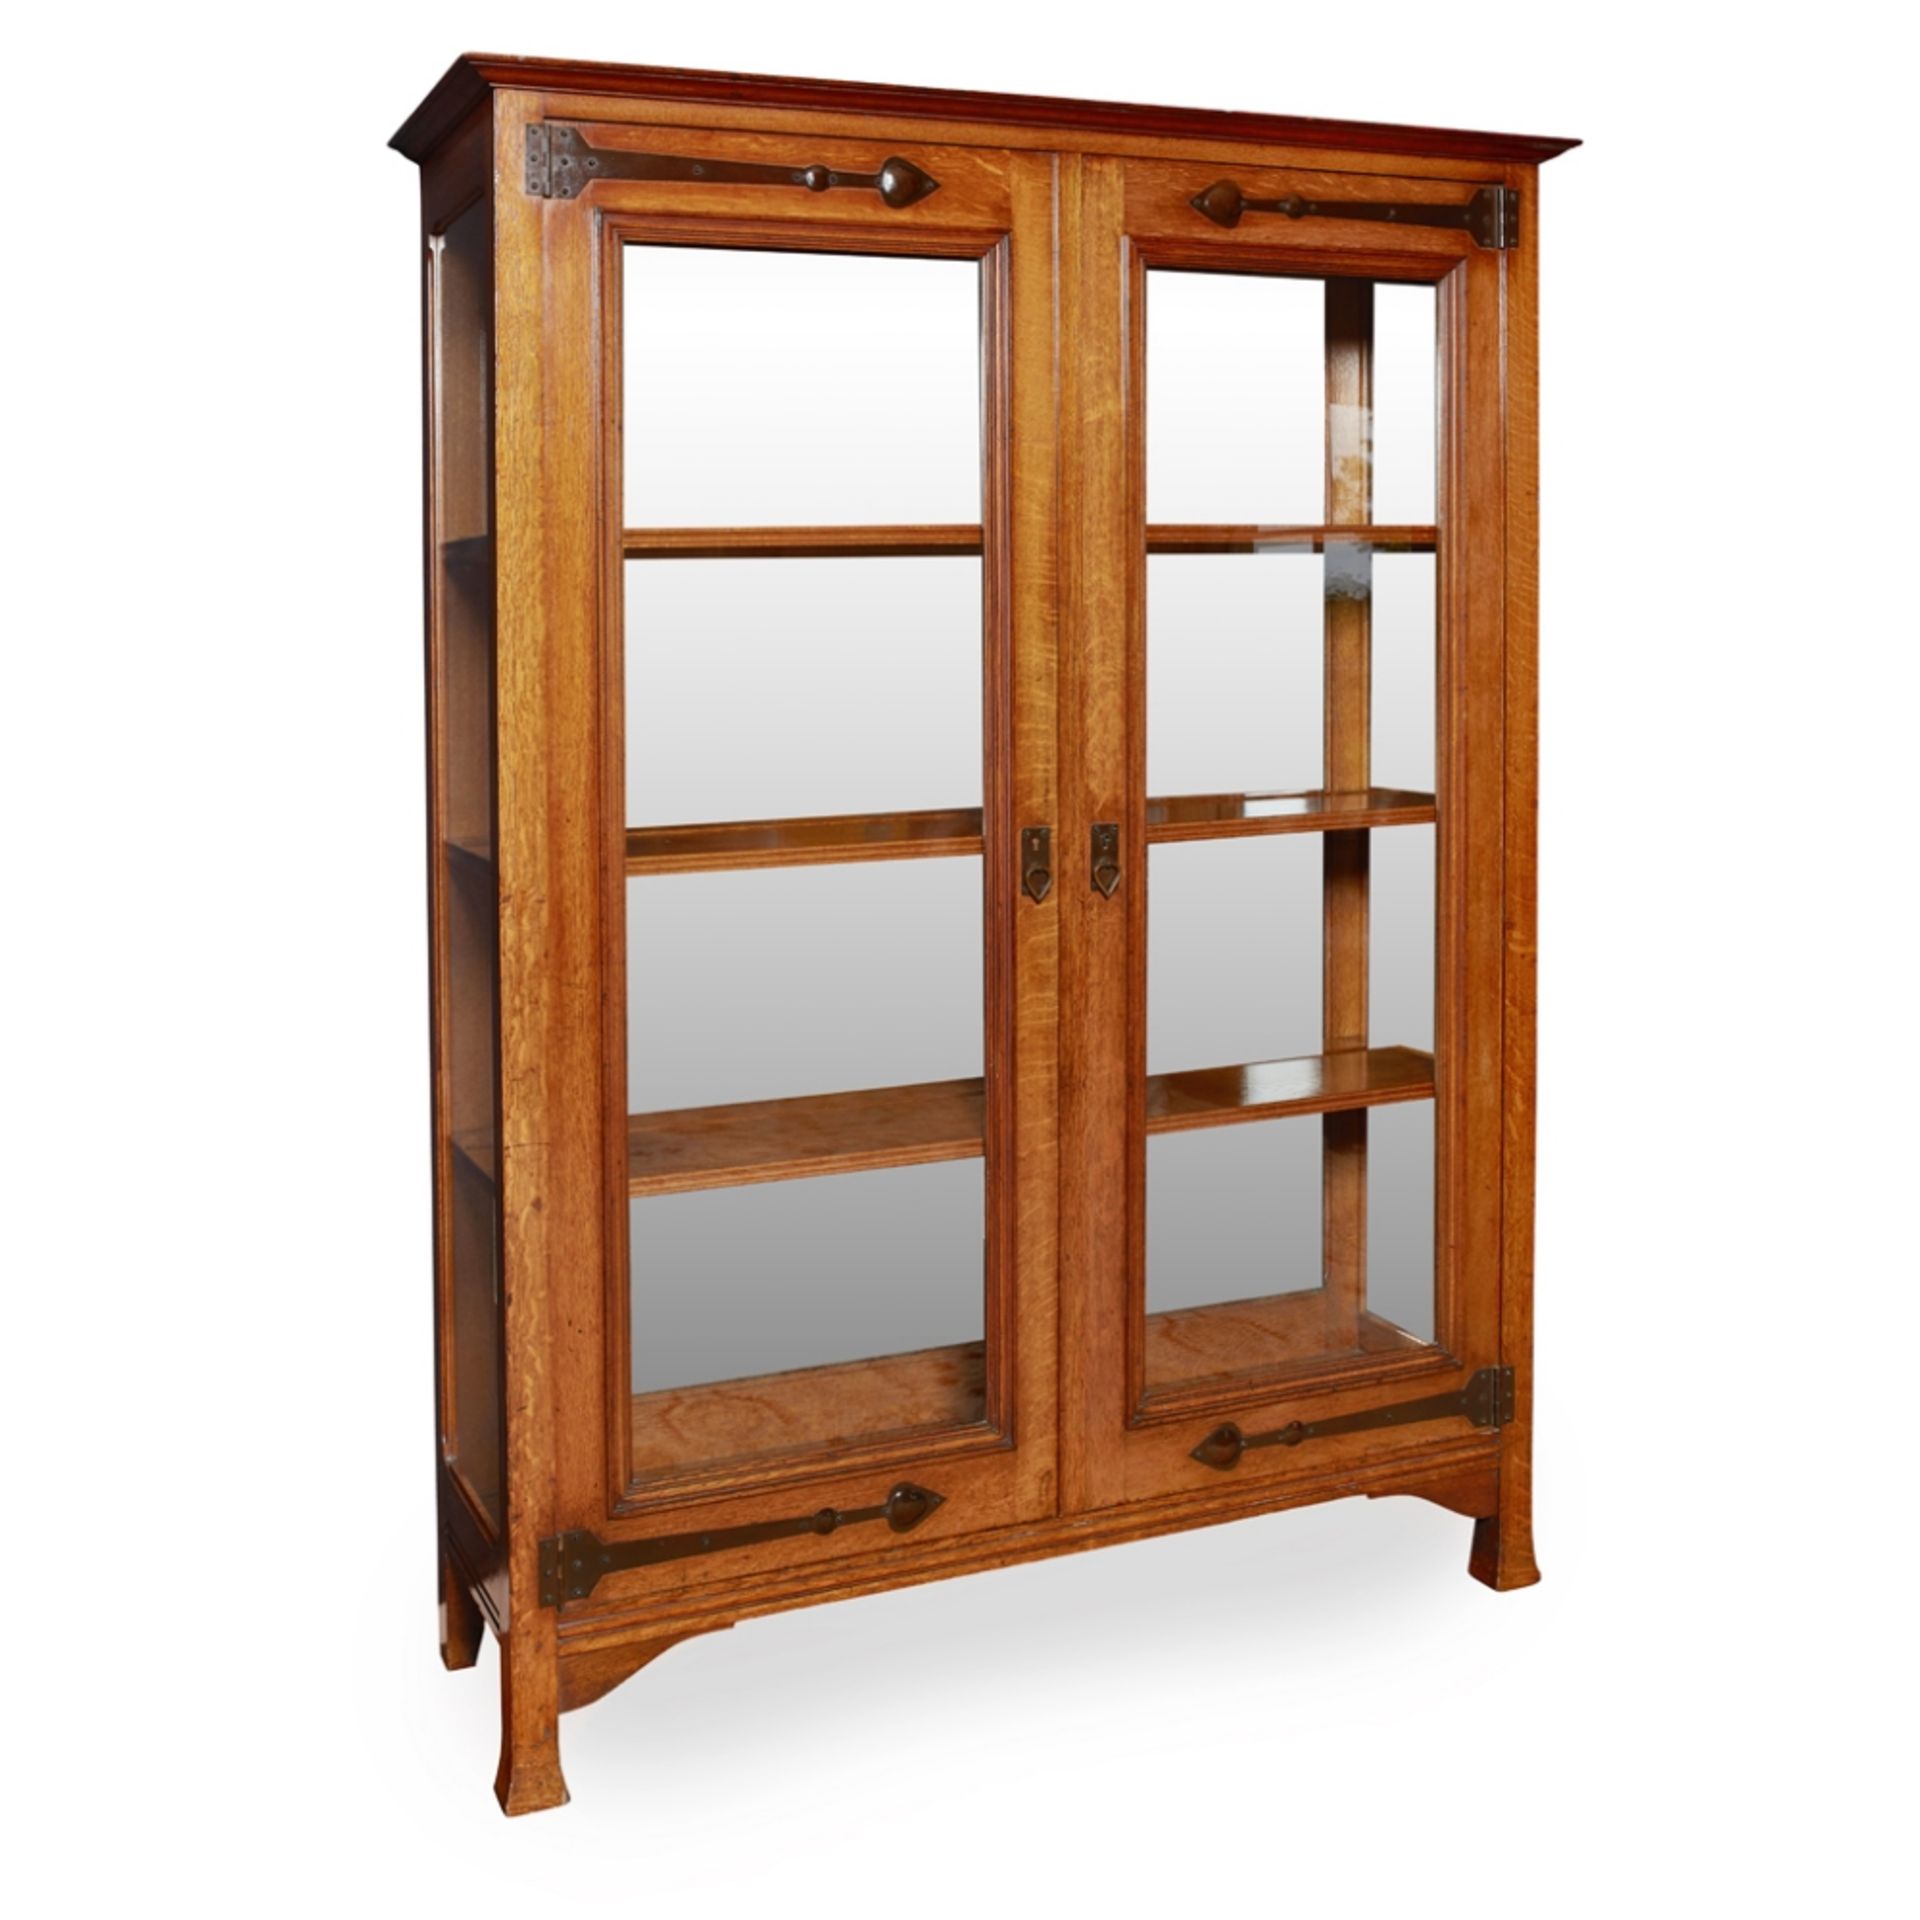 ENGLISH SCHOOL ARTS & CRAFTS OAK DISPLAY CABINET, CIRCA 1900 the moulded and projecting cornice - Image 2 of 2